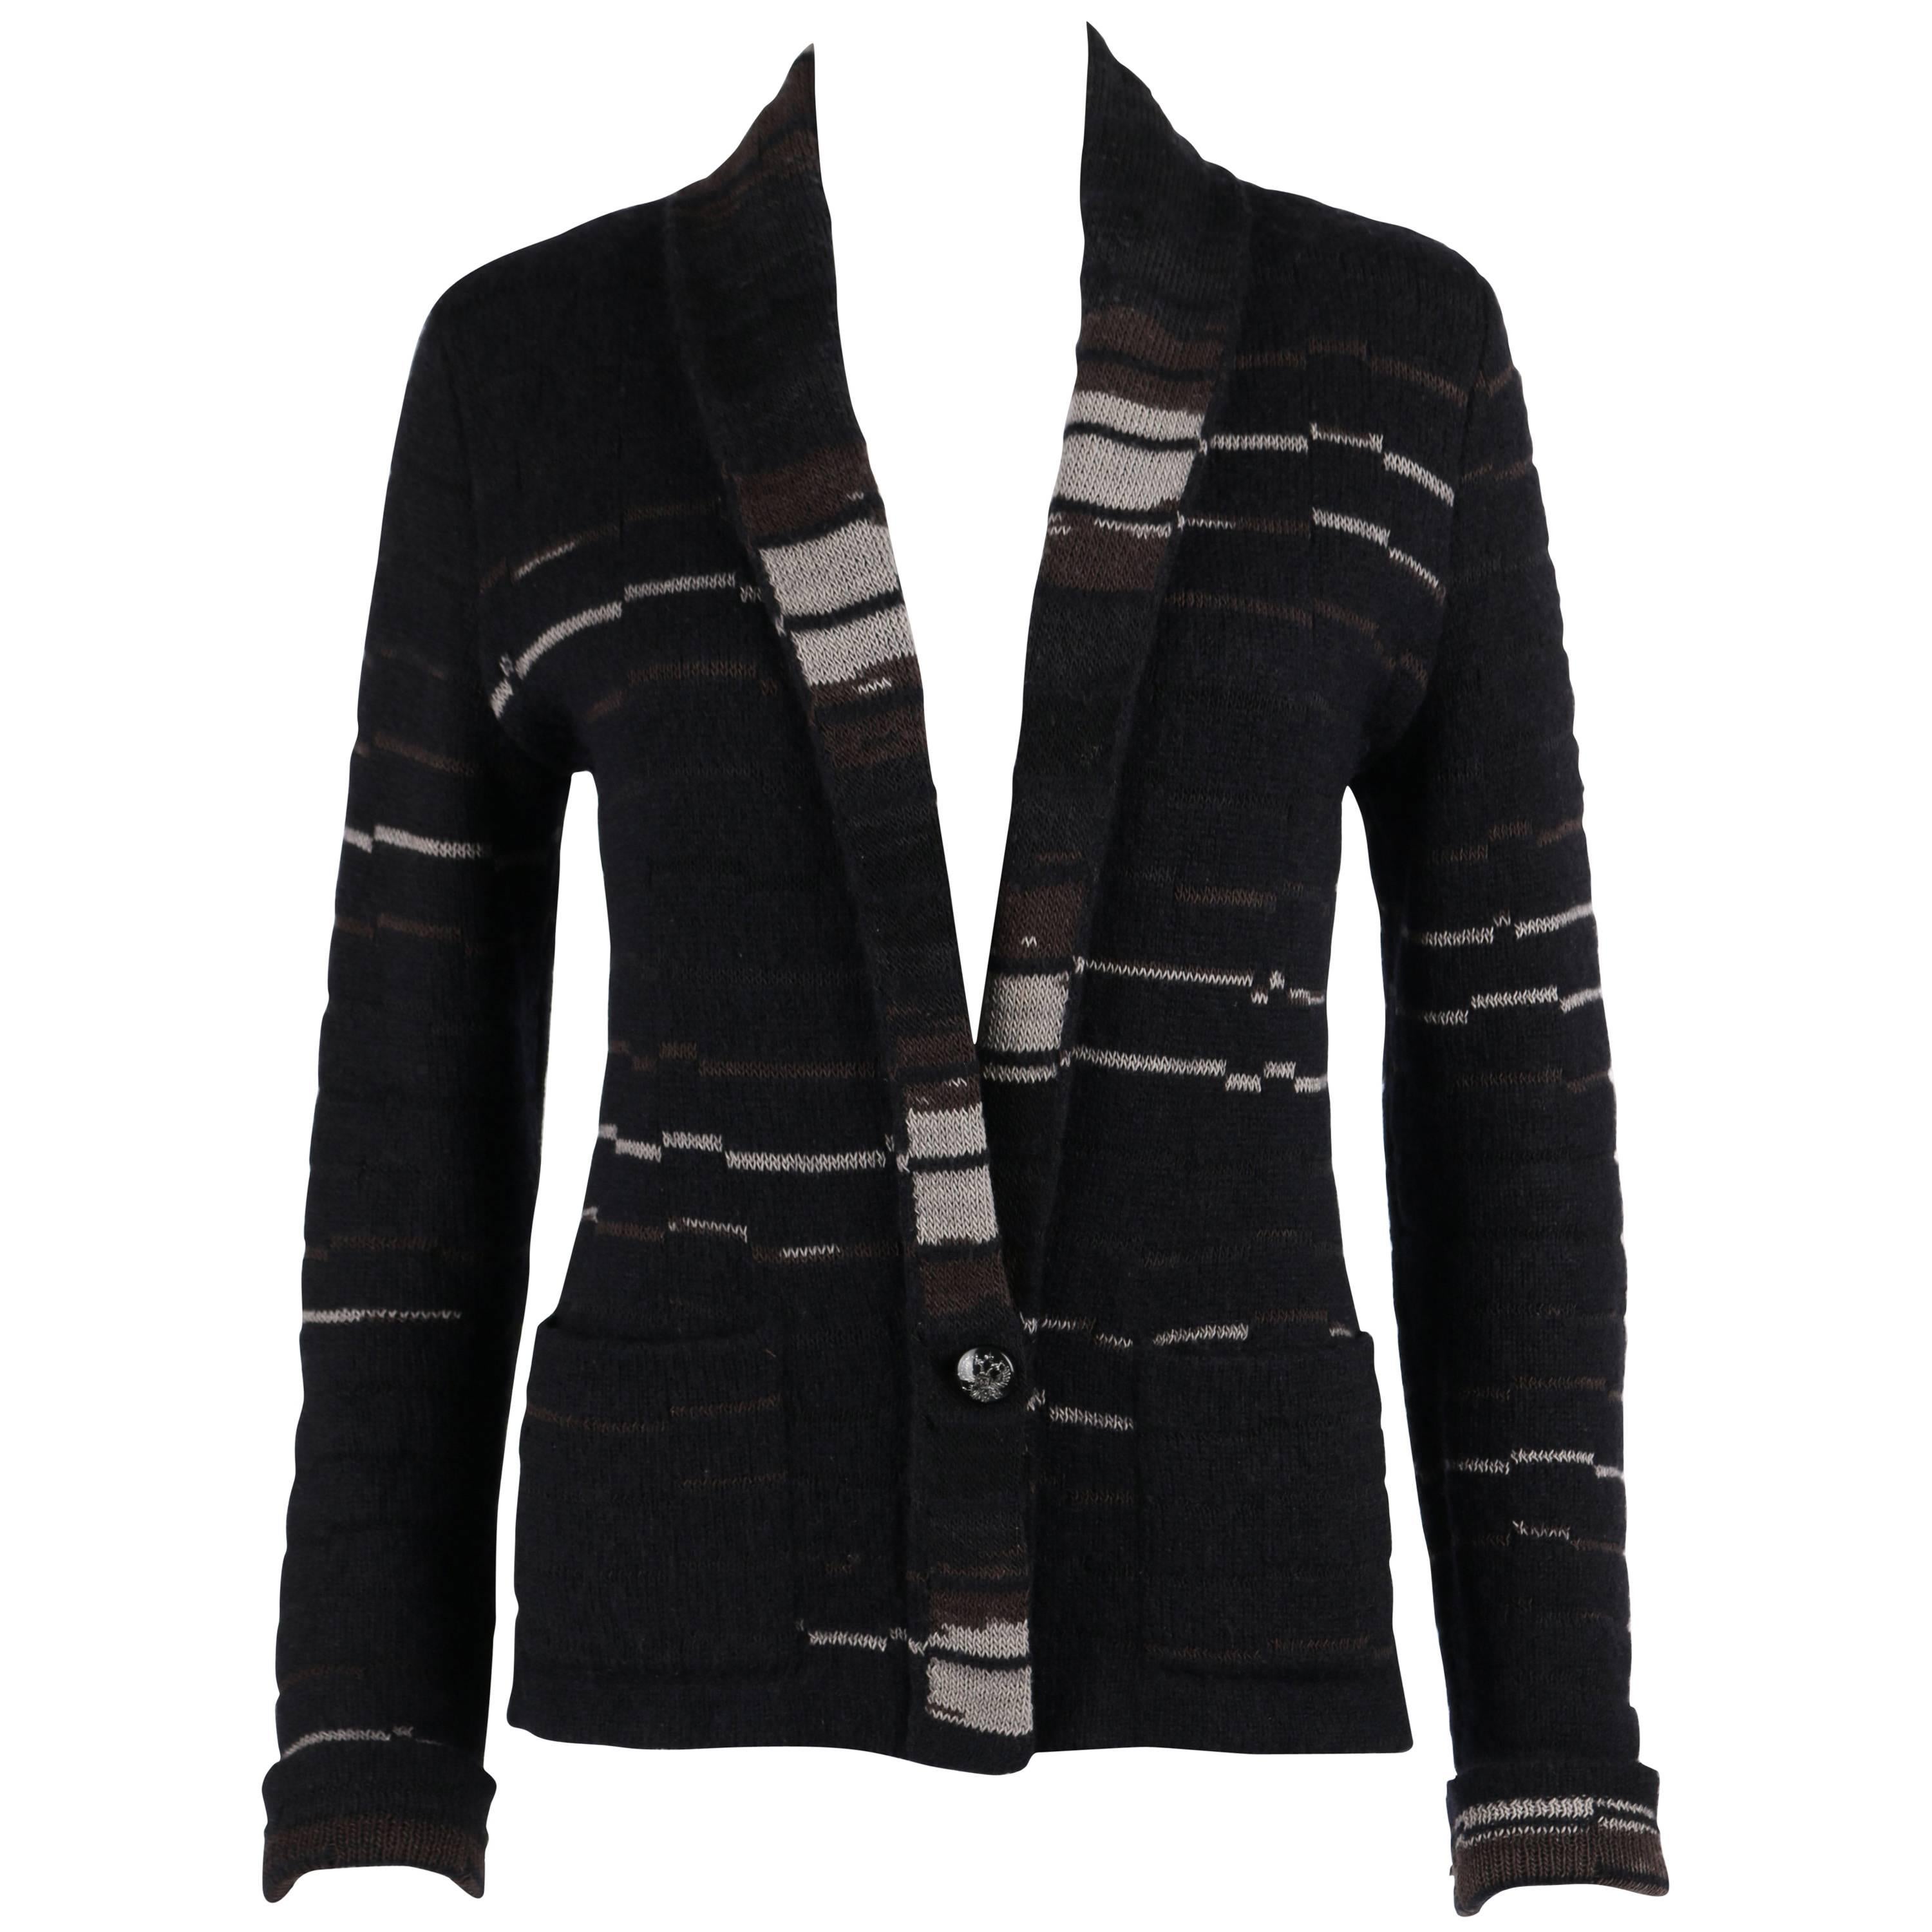 CHANEL A/W 2009 Shawl Collar Button Front Knit Cardigan Sweater Size 40